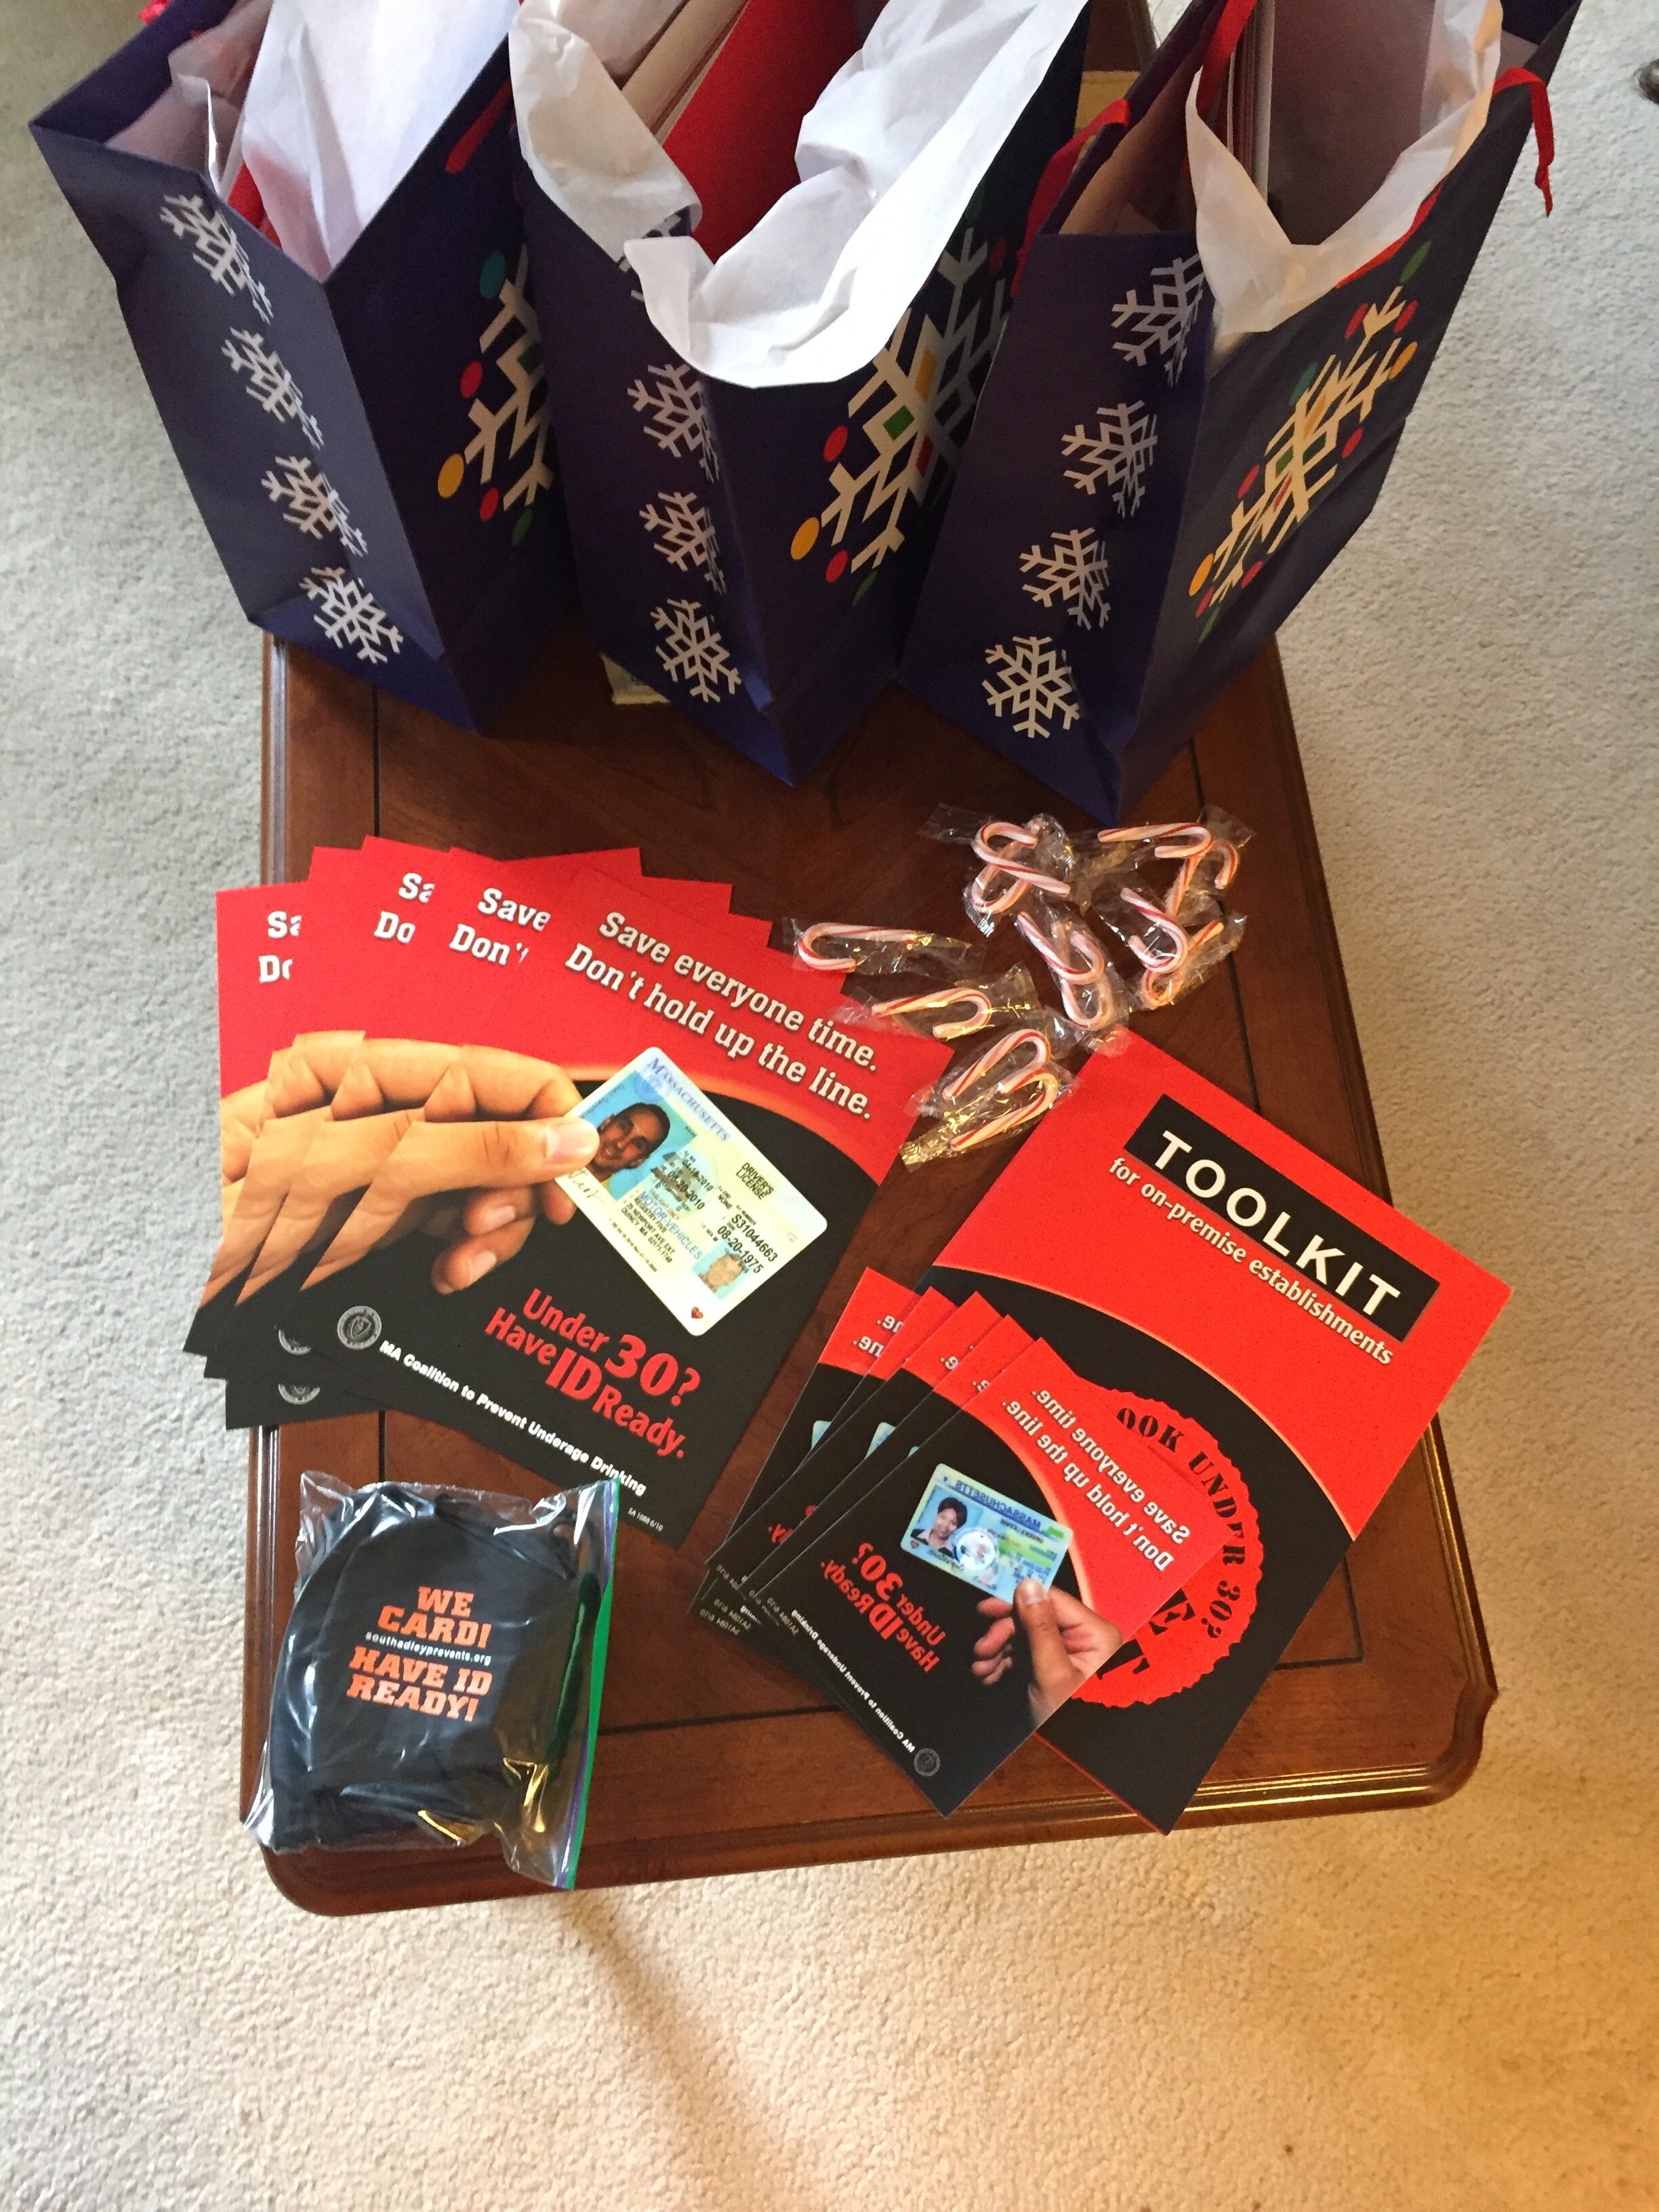 Retailer gift bags and contents 12-2020.JPG